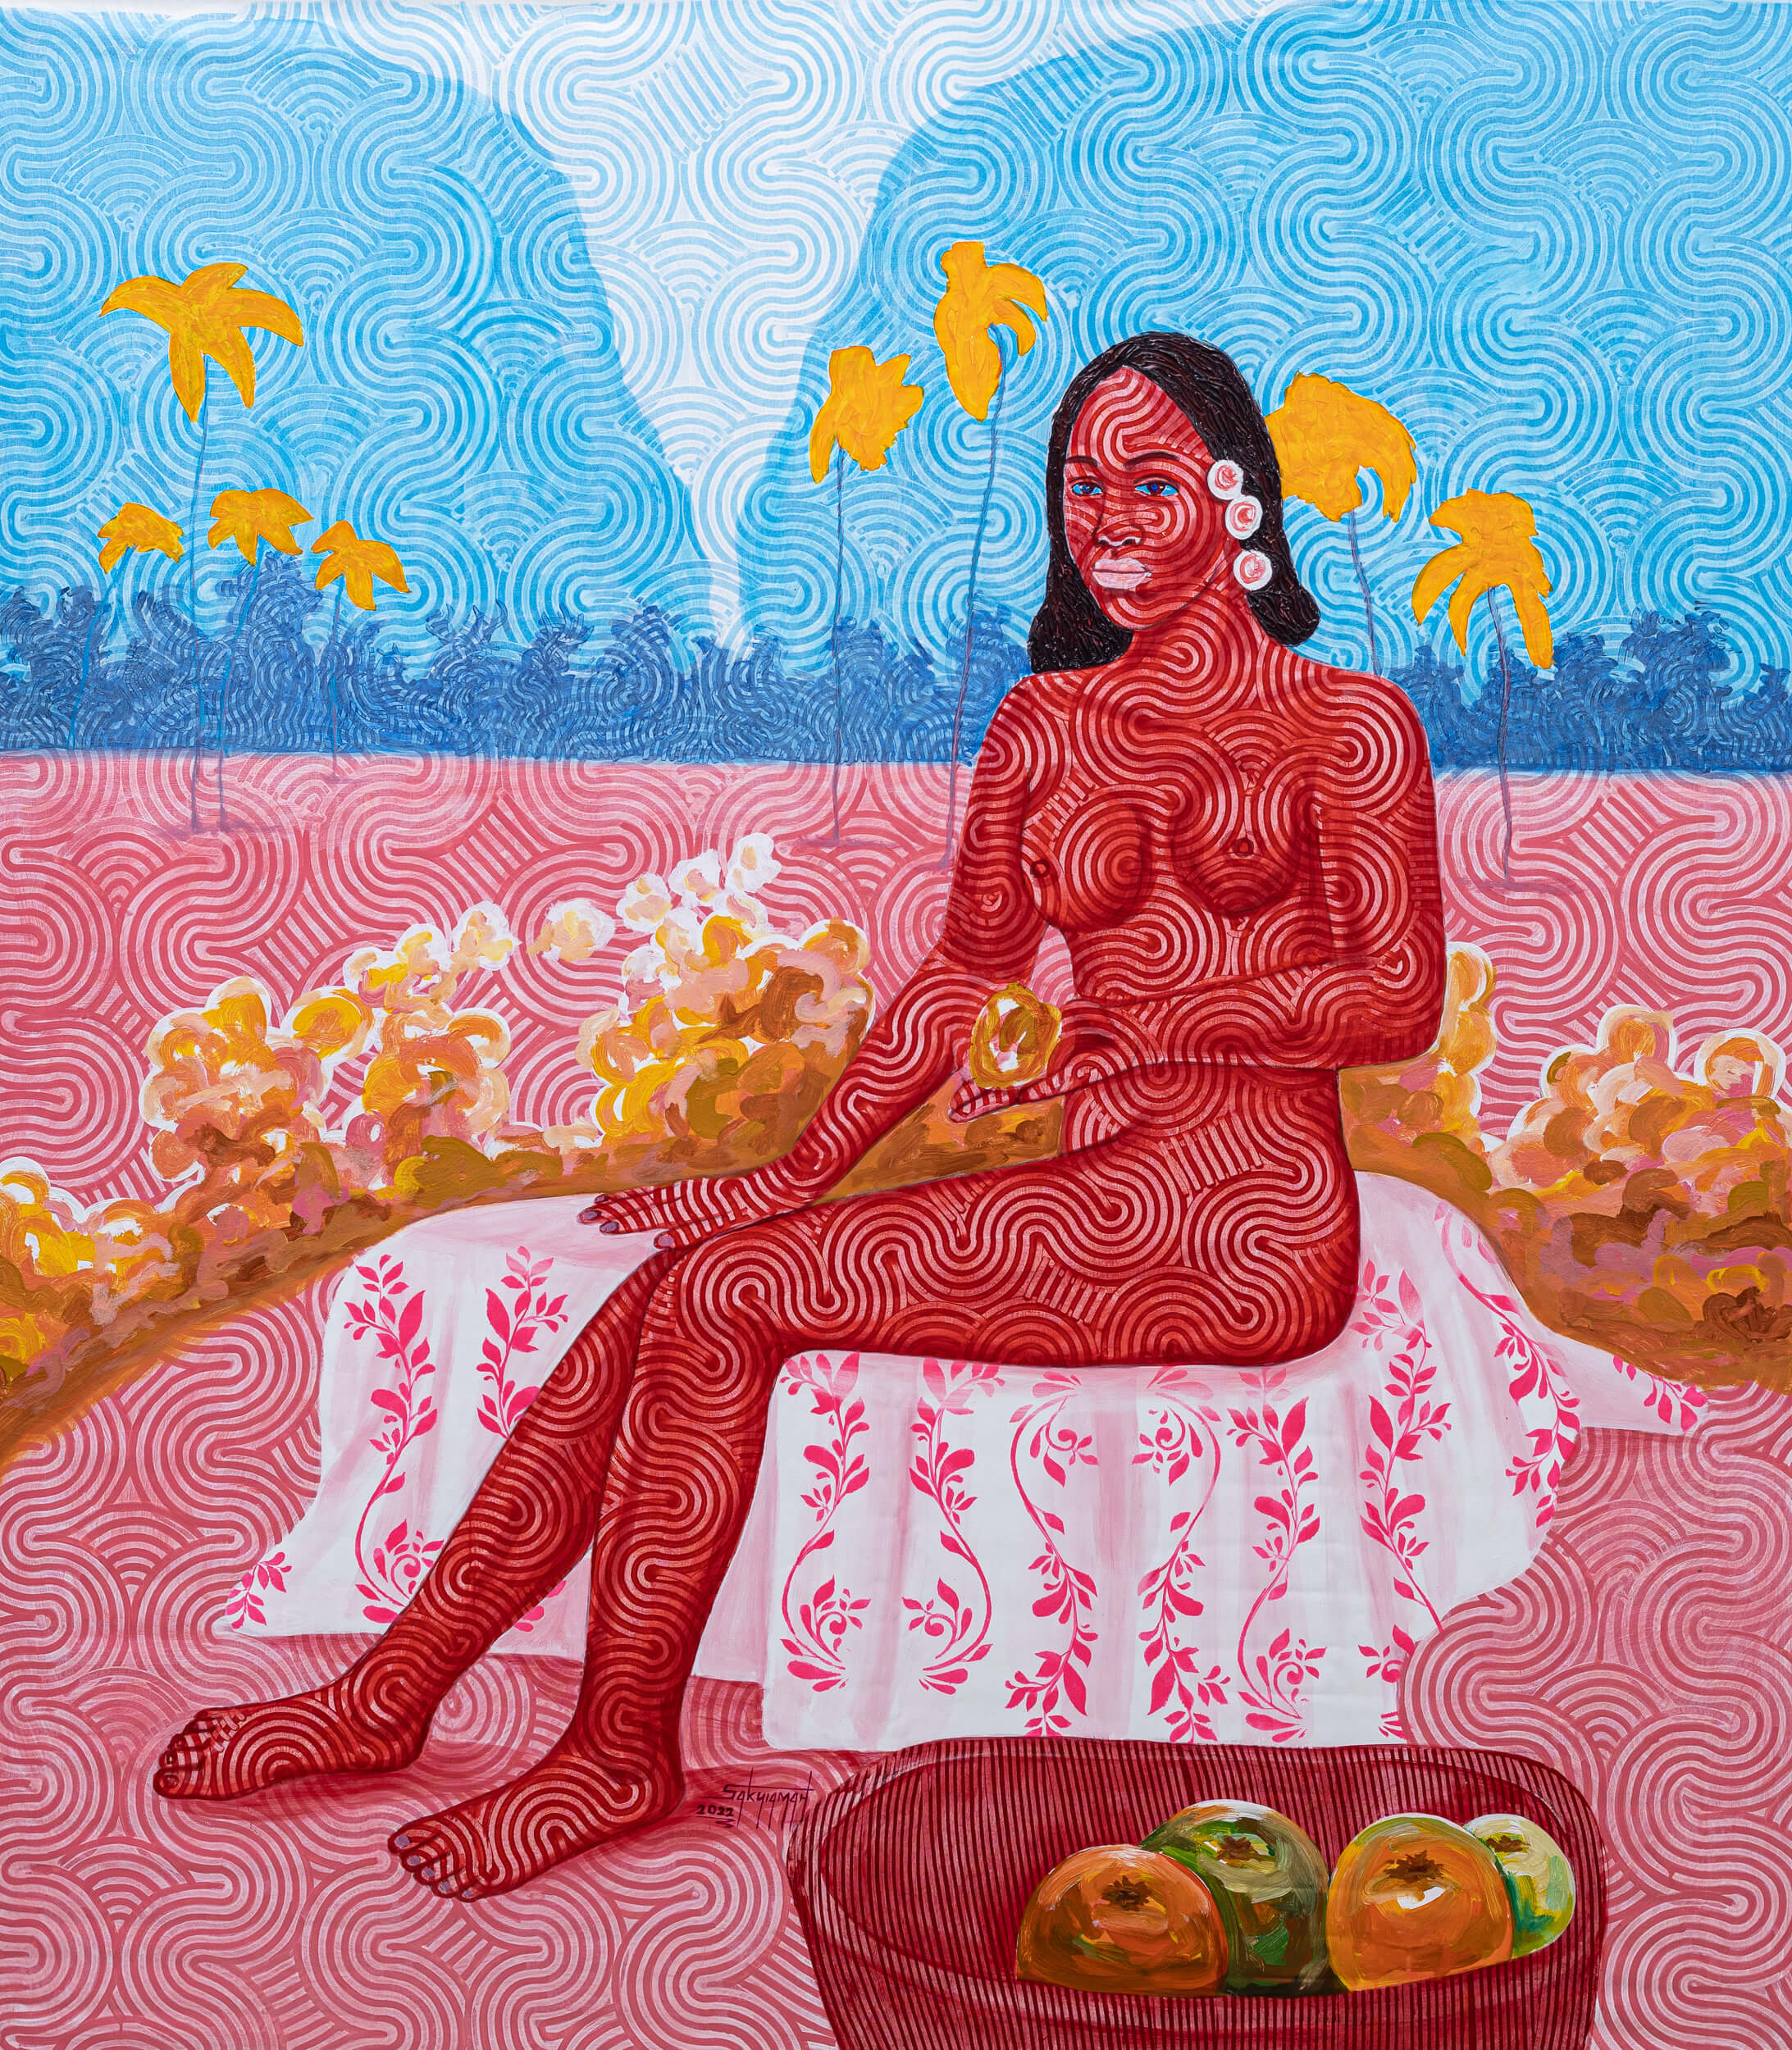 THE RED SEATED NUDE FIGURE